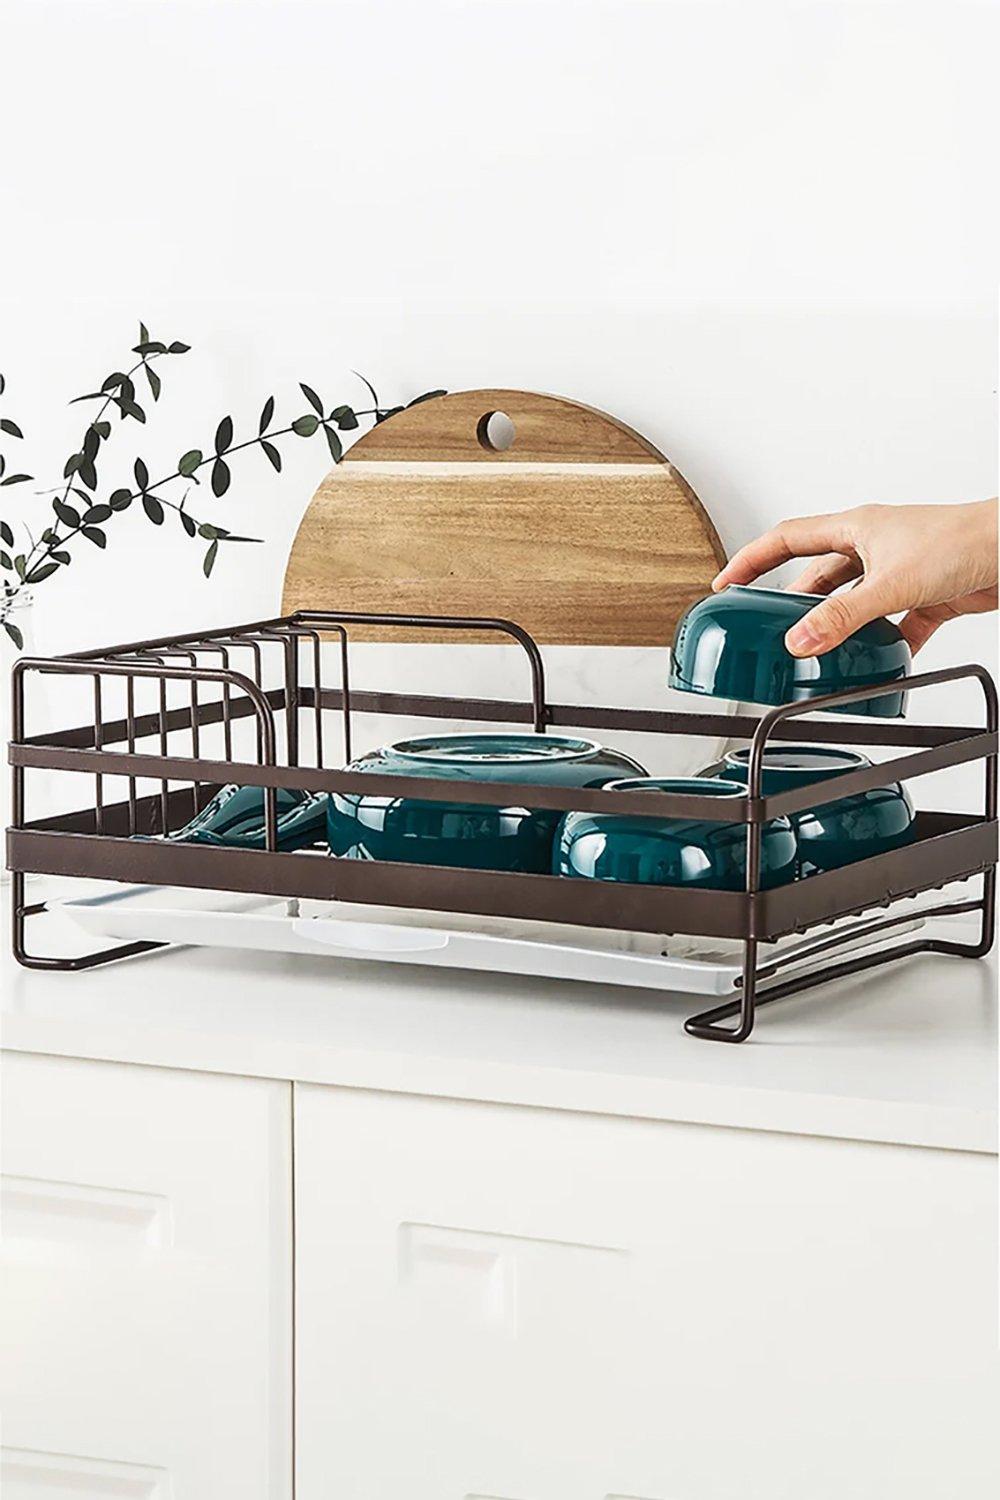 Kitchen Metal Dish Drainer Rack with Removable Drip Tray Sink Brown